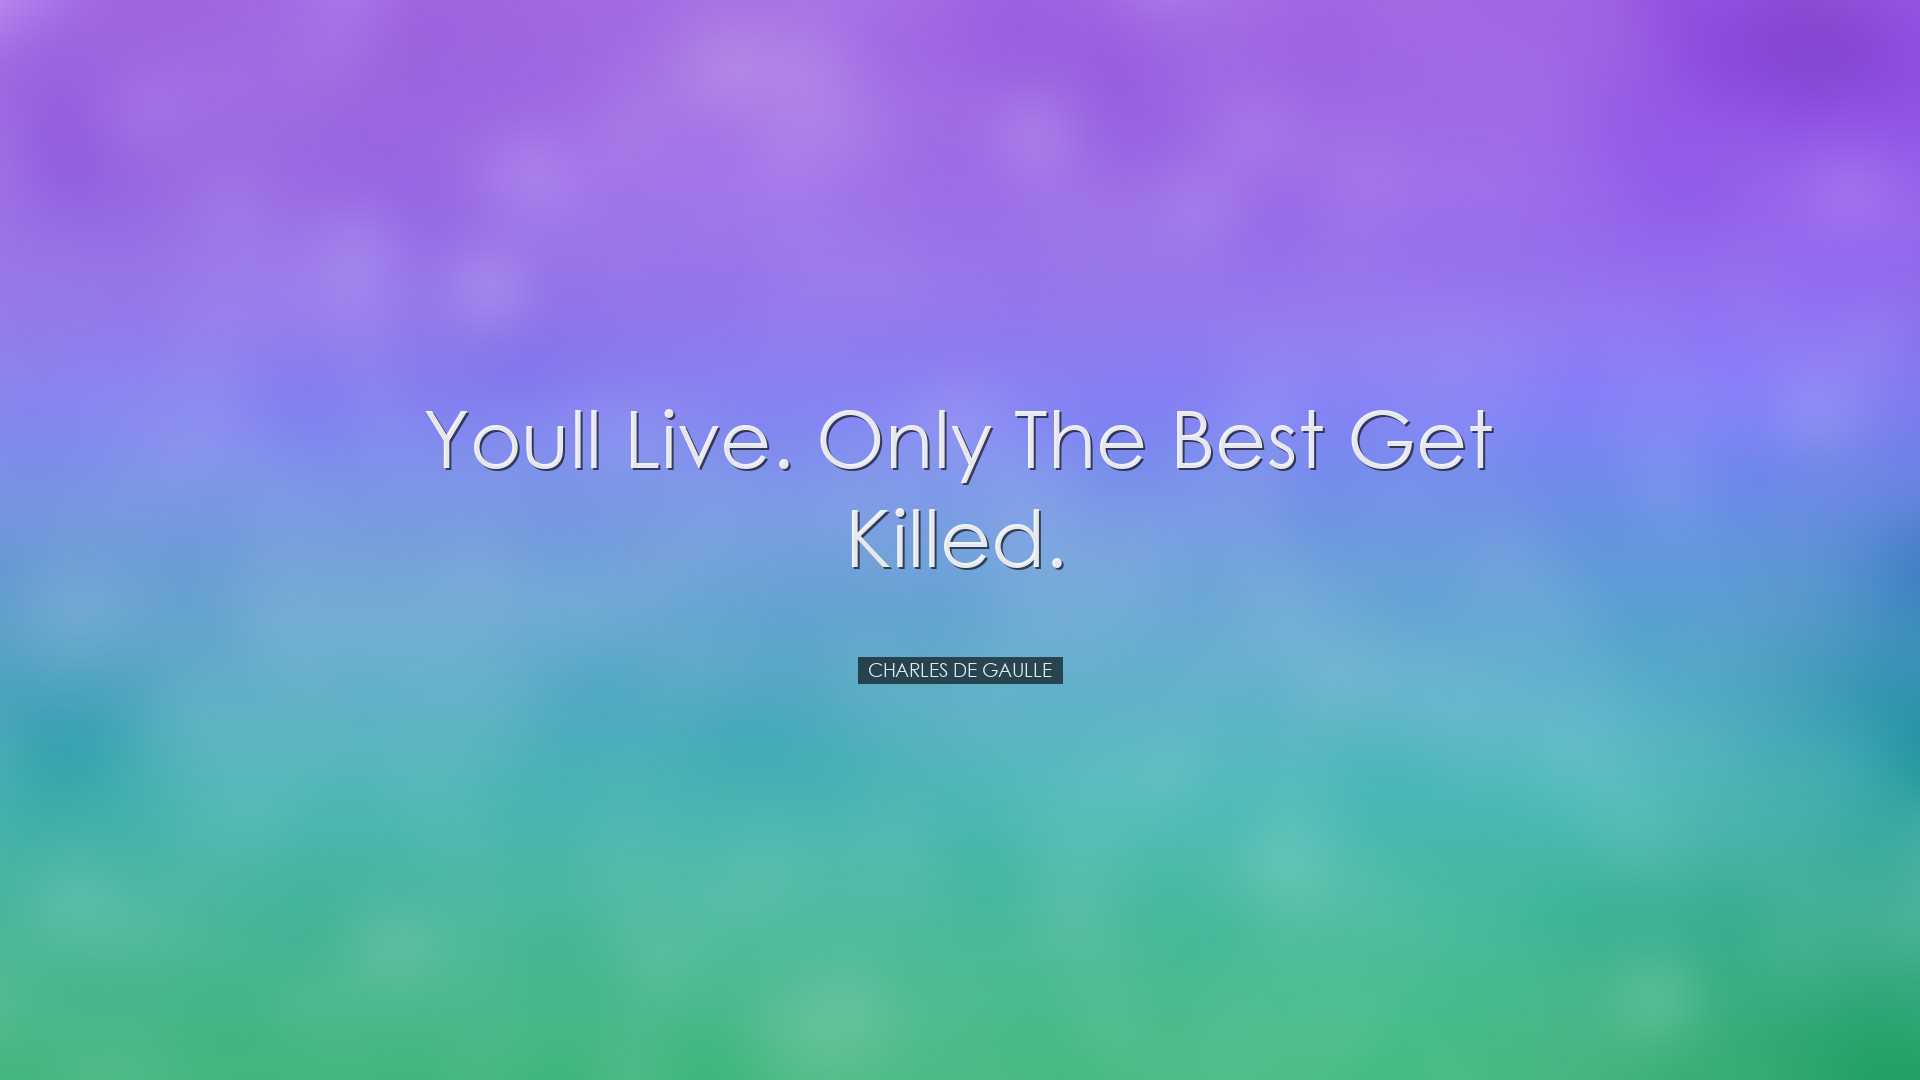 Youll live. Only the best get killed. - Charles de Gaulle